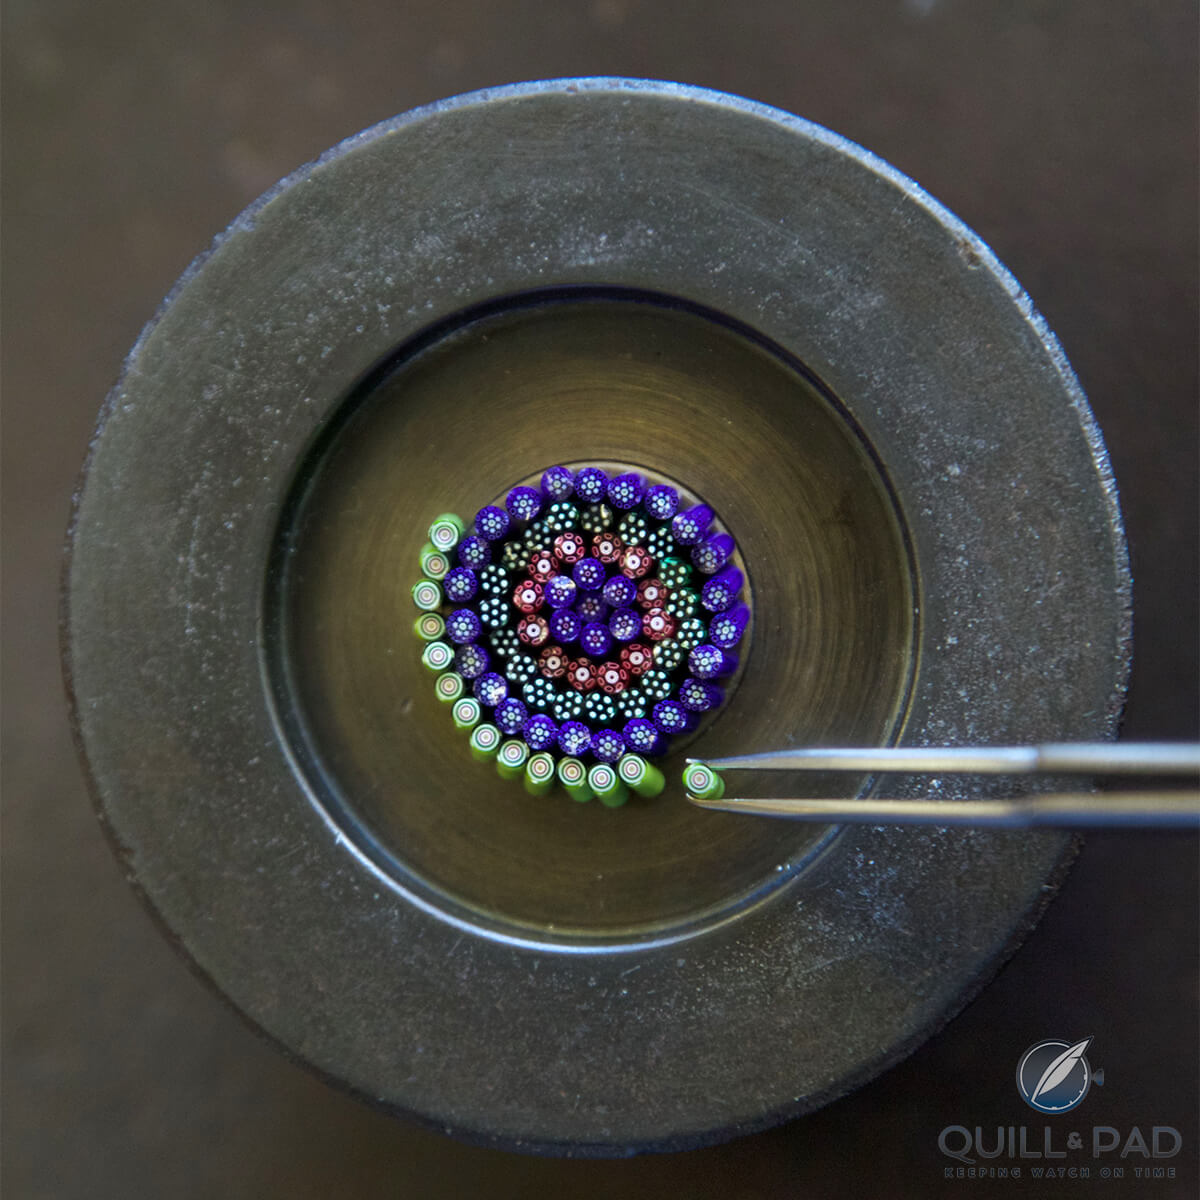 Arrangement of chopsticks (cuts of cane sections) to create a Millefiori crystal